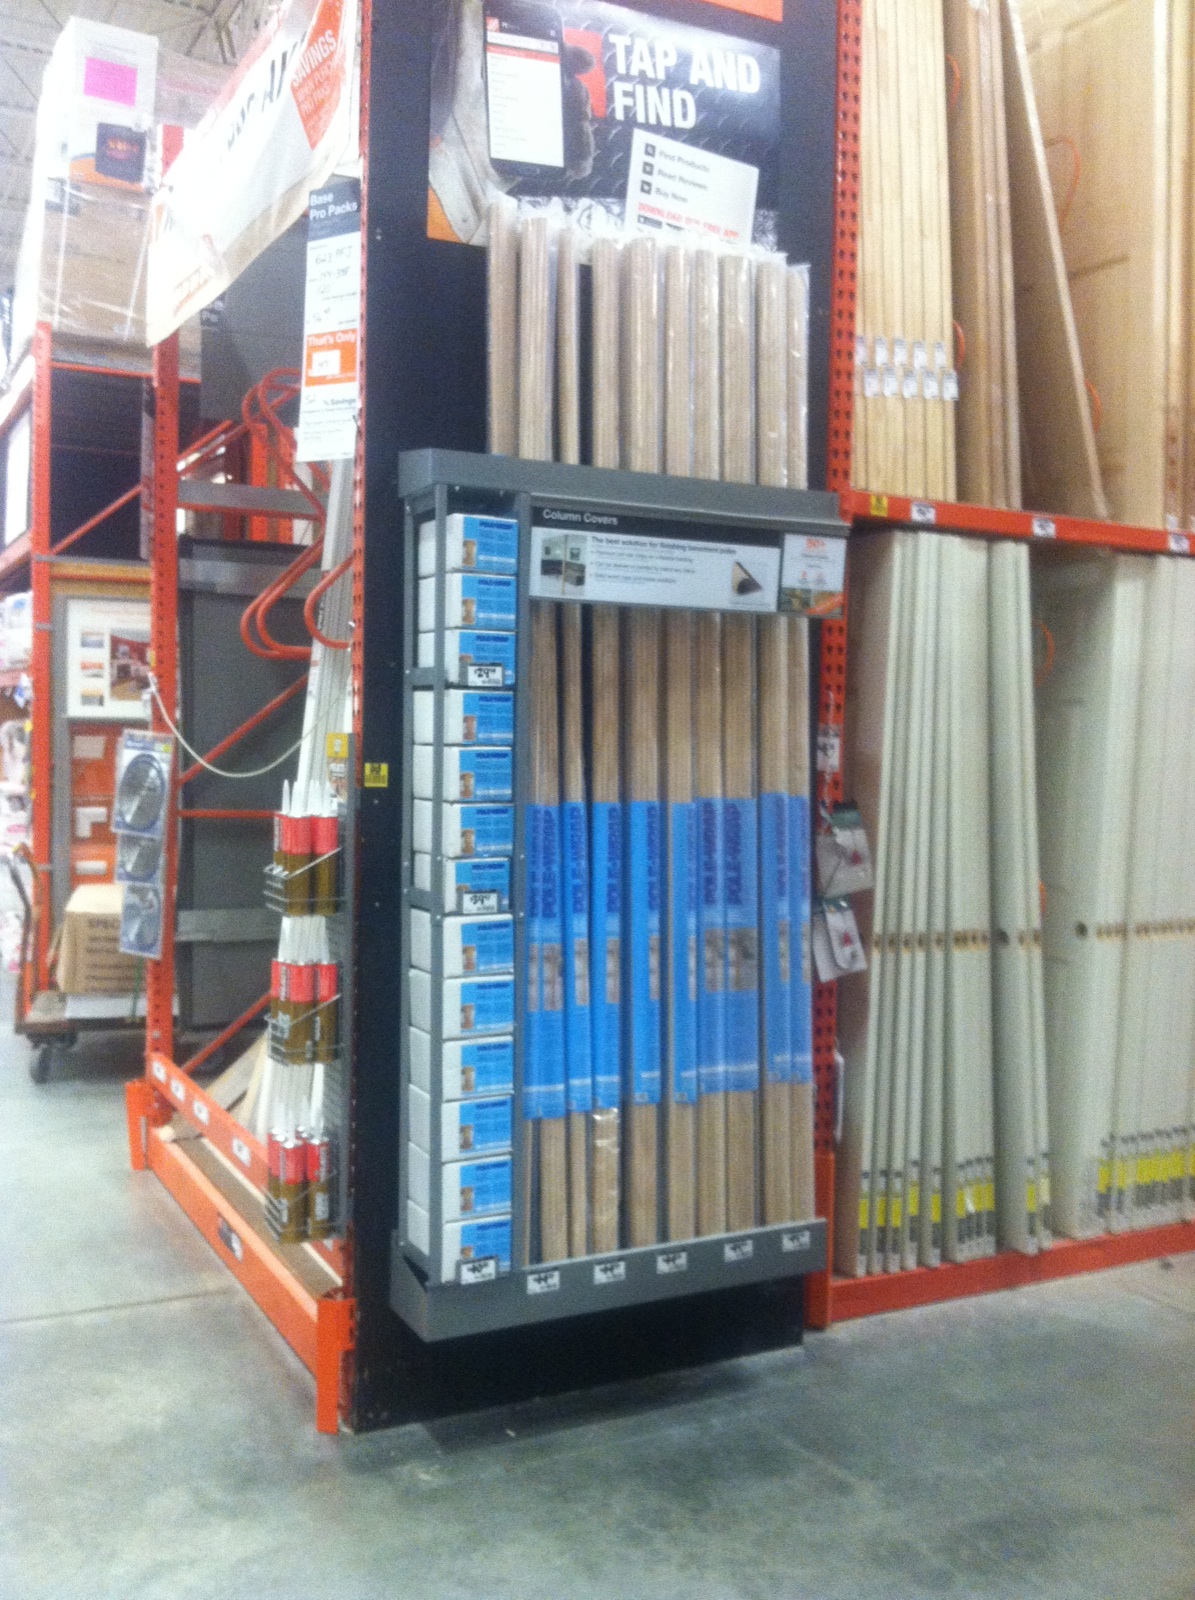 Pole-Wrap Sold at Your Local Home Depot!